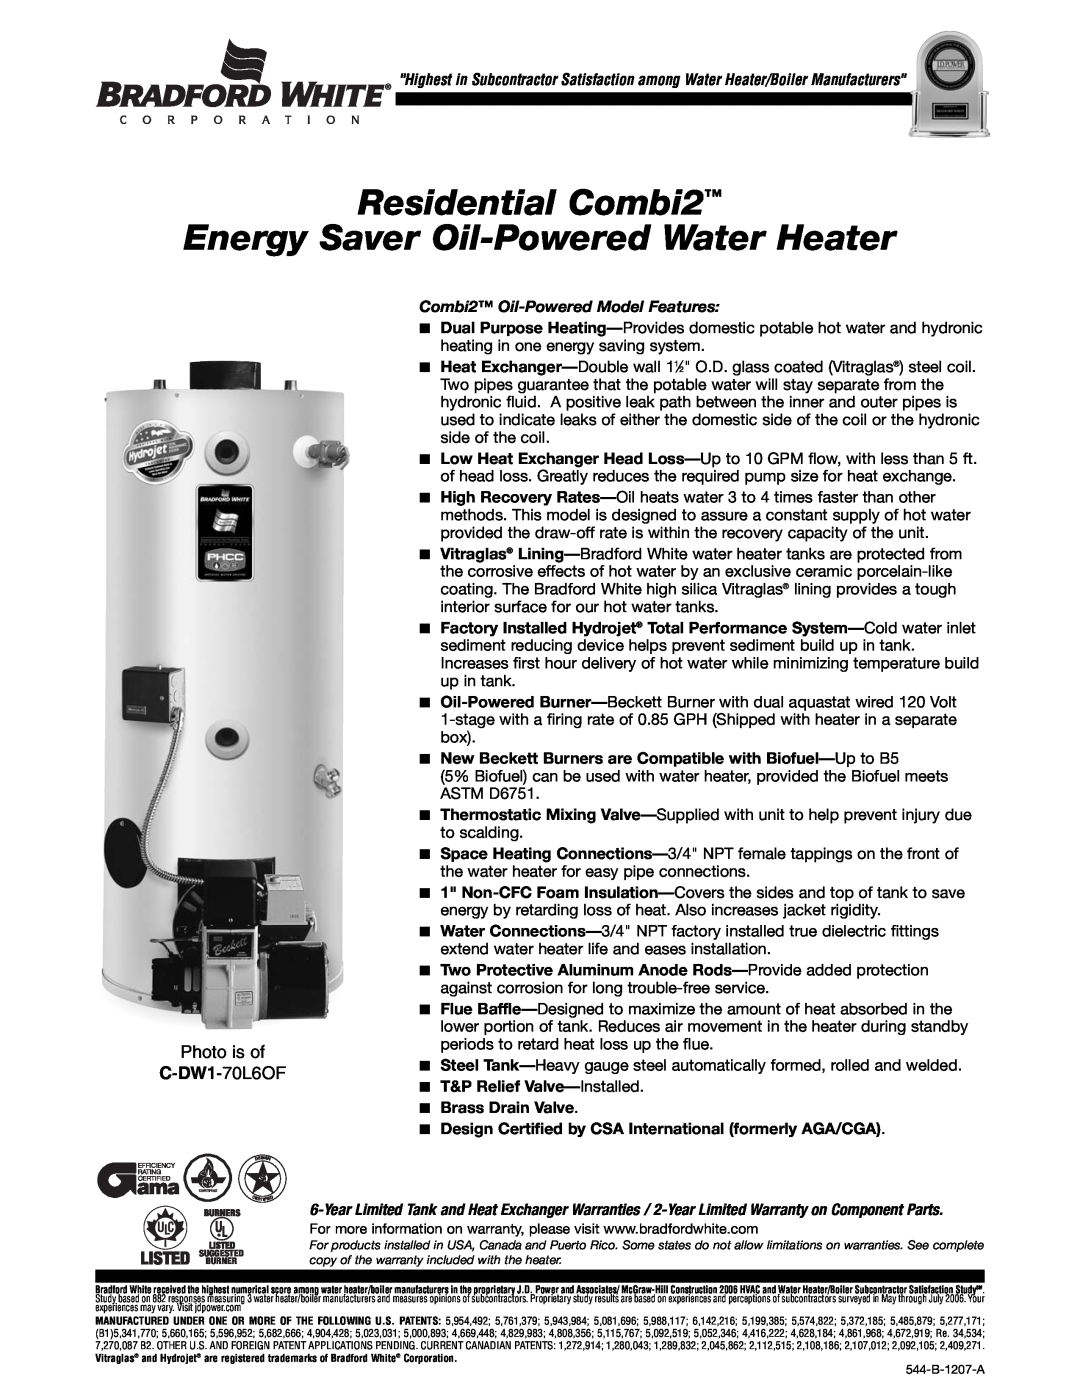 Bradford-White Corp 544-B warranty Residential Combi2 Energy Saver Oil-Powered Water Heater, Photo is of C-DW1-70L6OF 